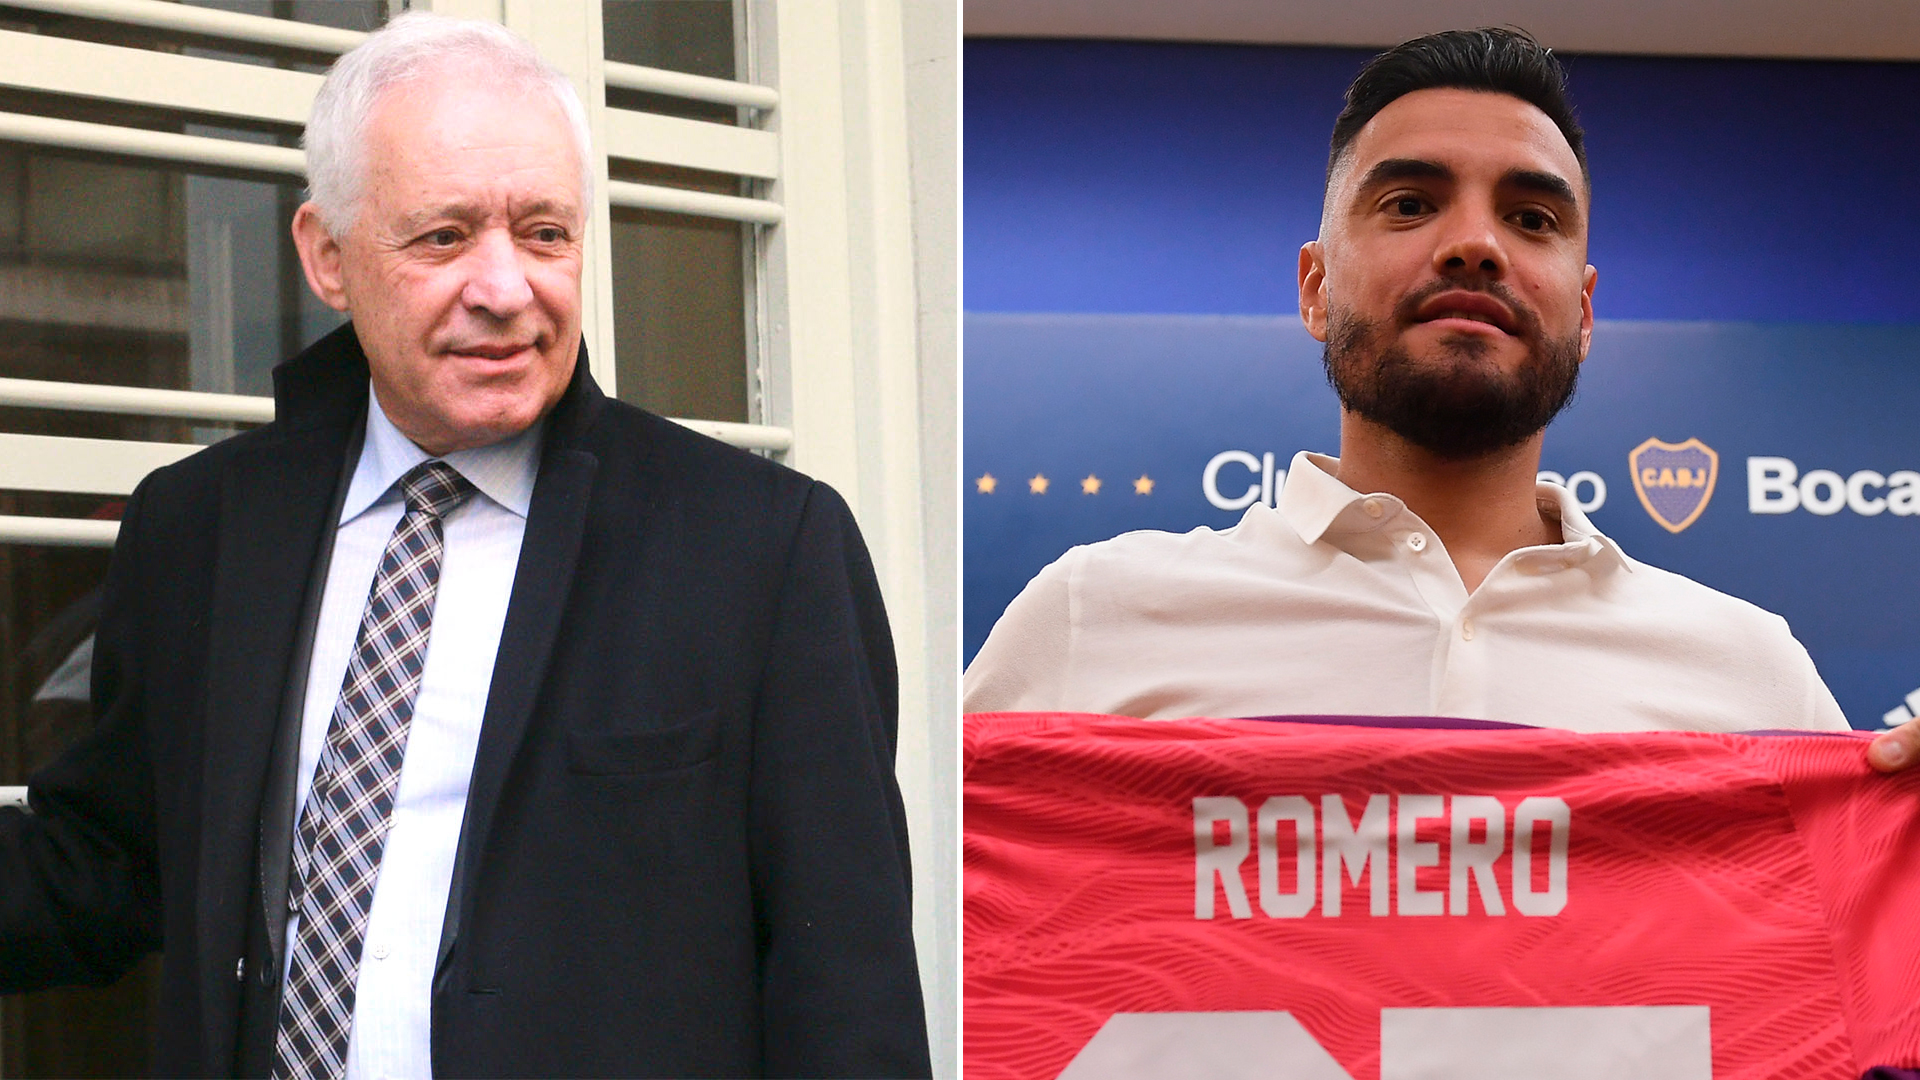 Academy president expressed his disappointment with Romero's decision